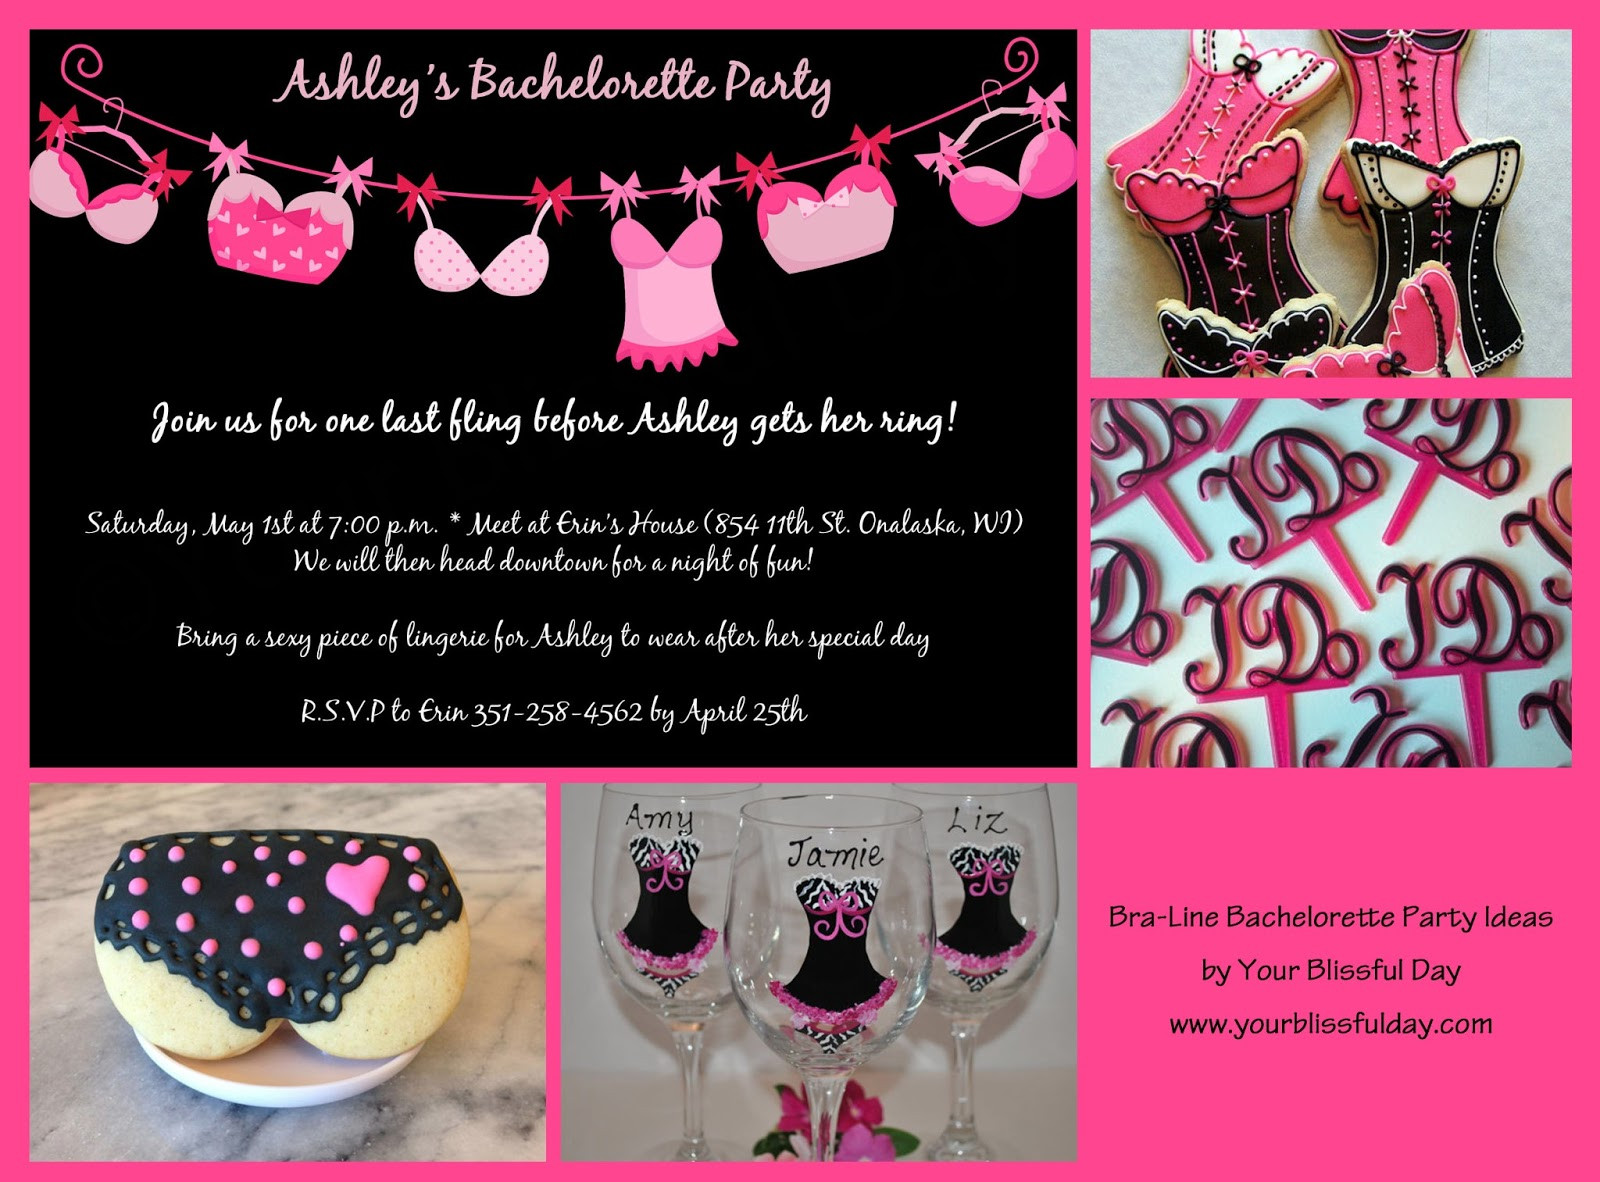 Day Bachelorette Party Ideas
 Juli 2013 your blis ful day